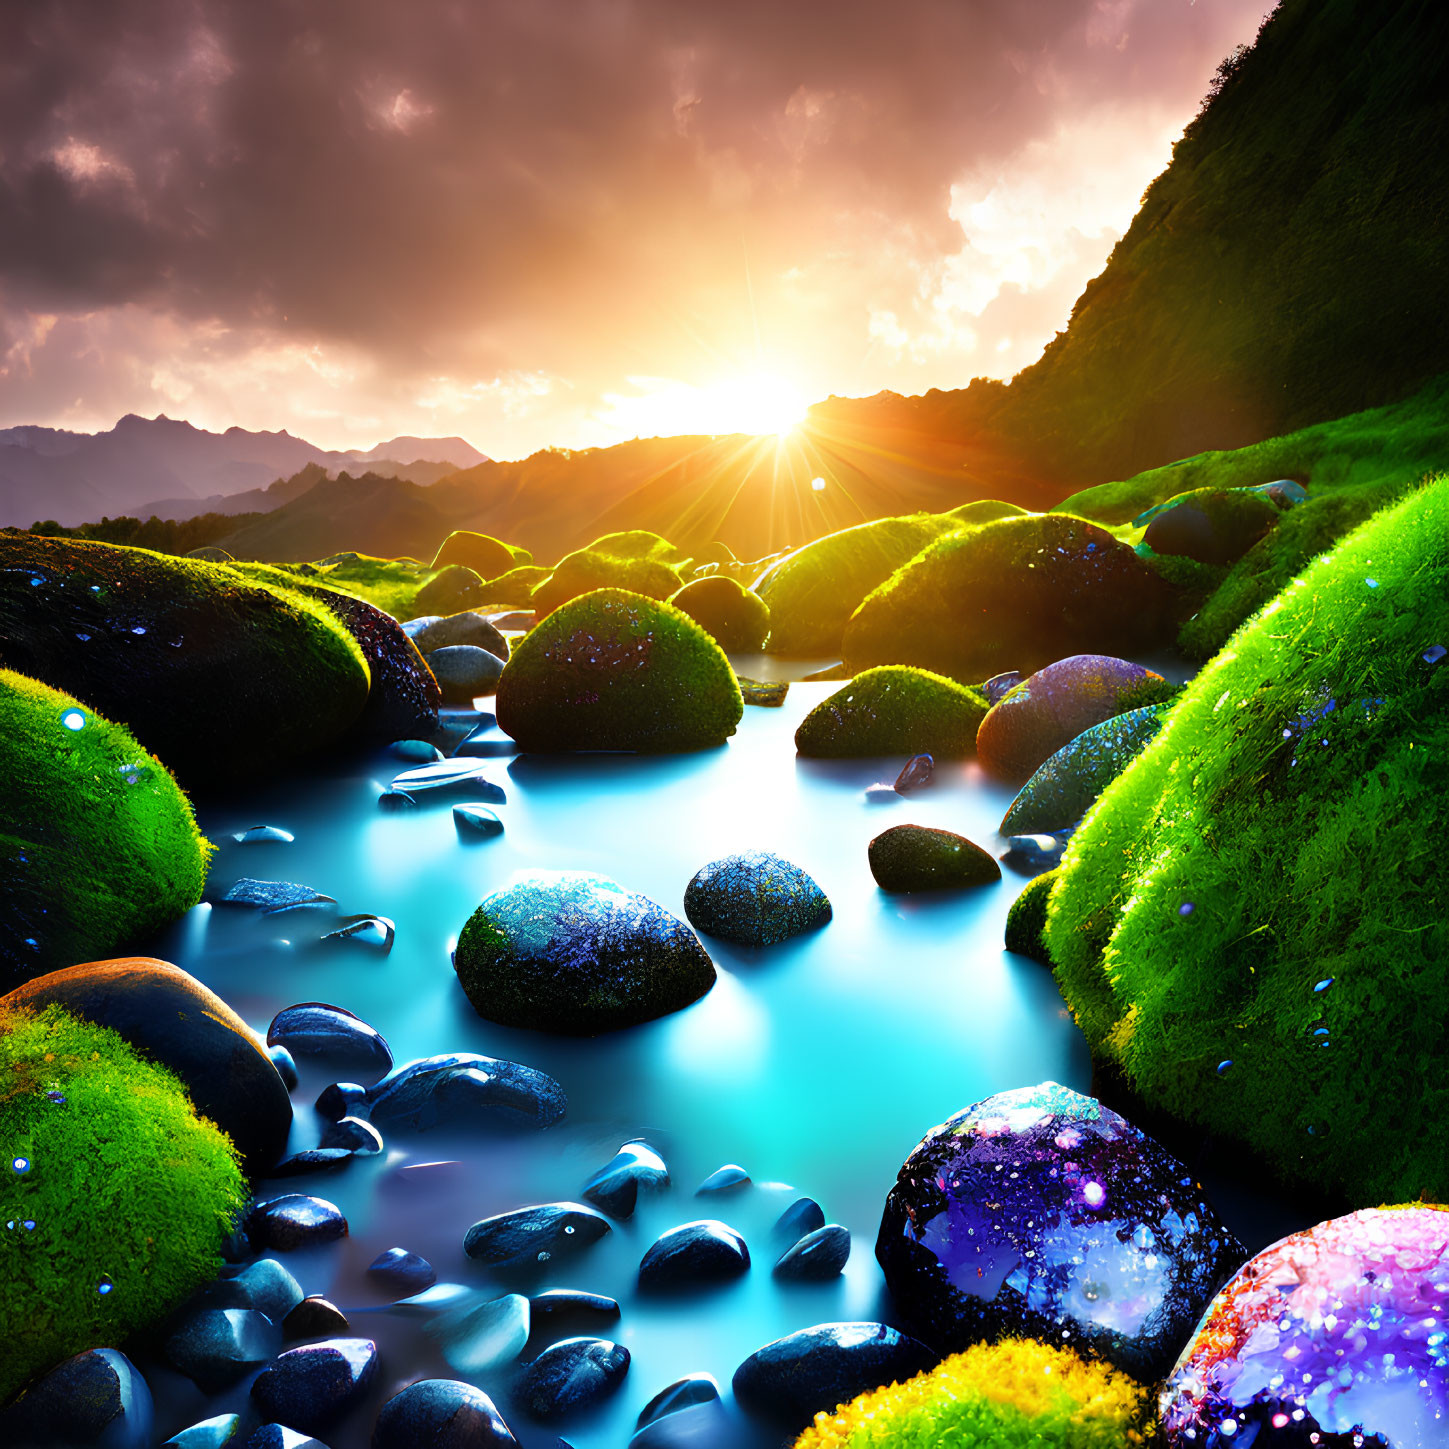 Majestic mountain stream at sunset with moss-covered stones